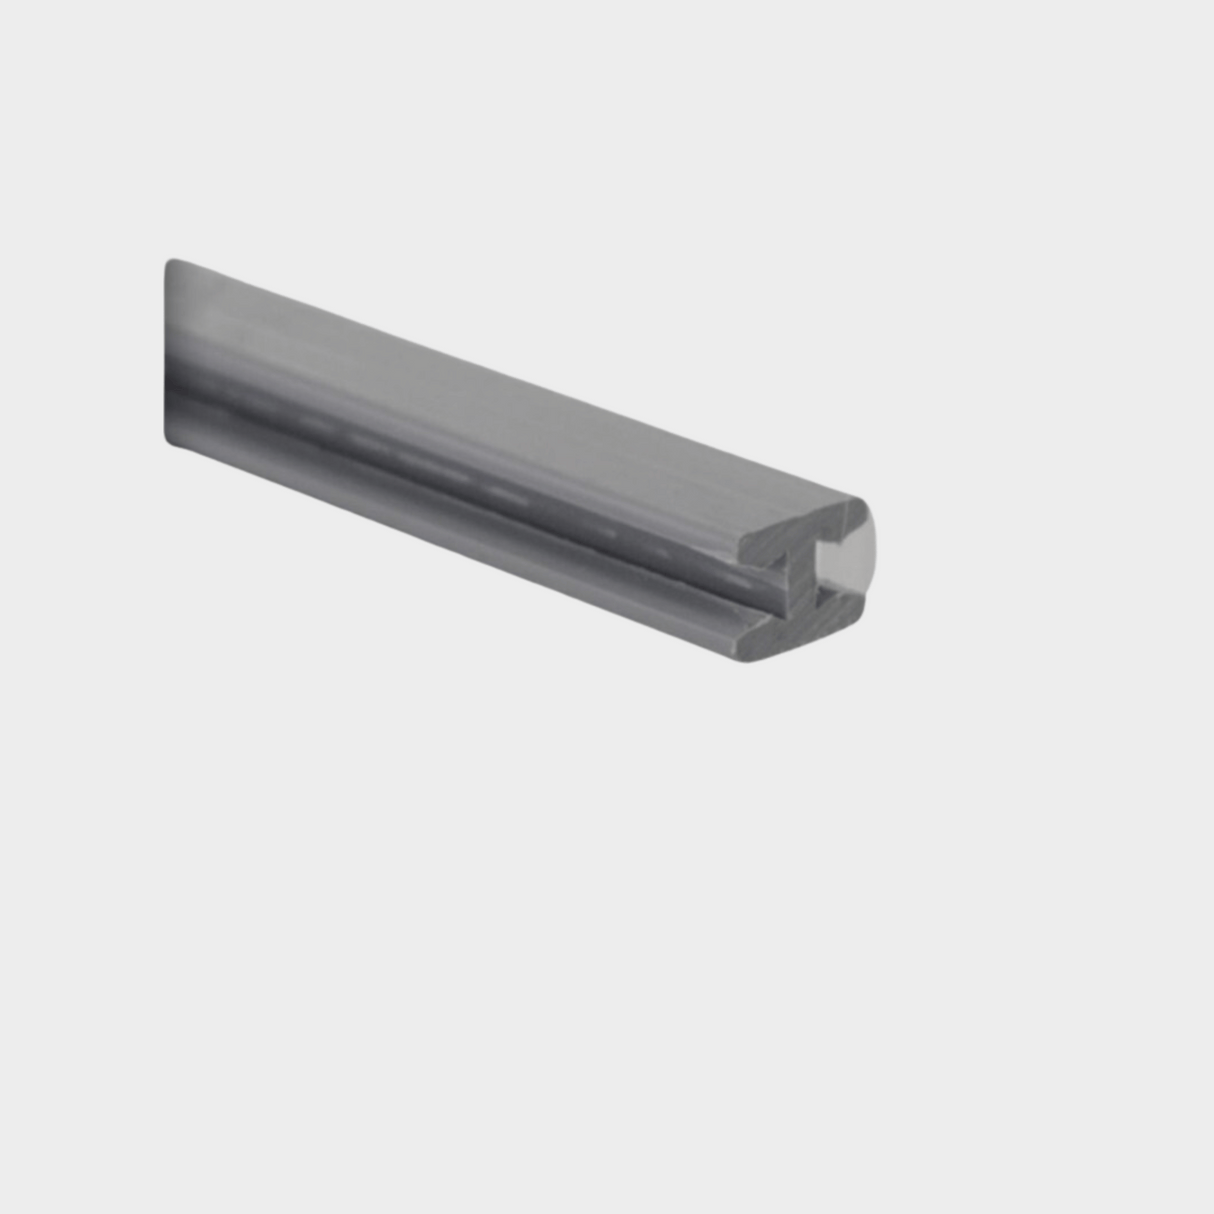 Samsung Bayonet PVC Sliding Channel - 4m Length for Duct Installation